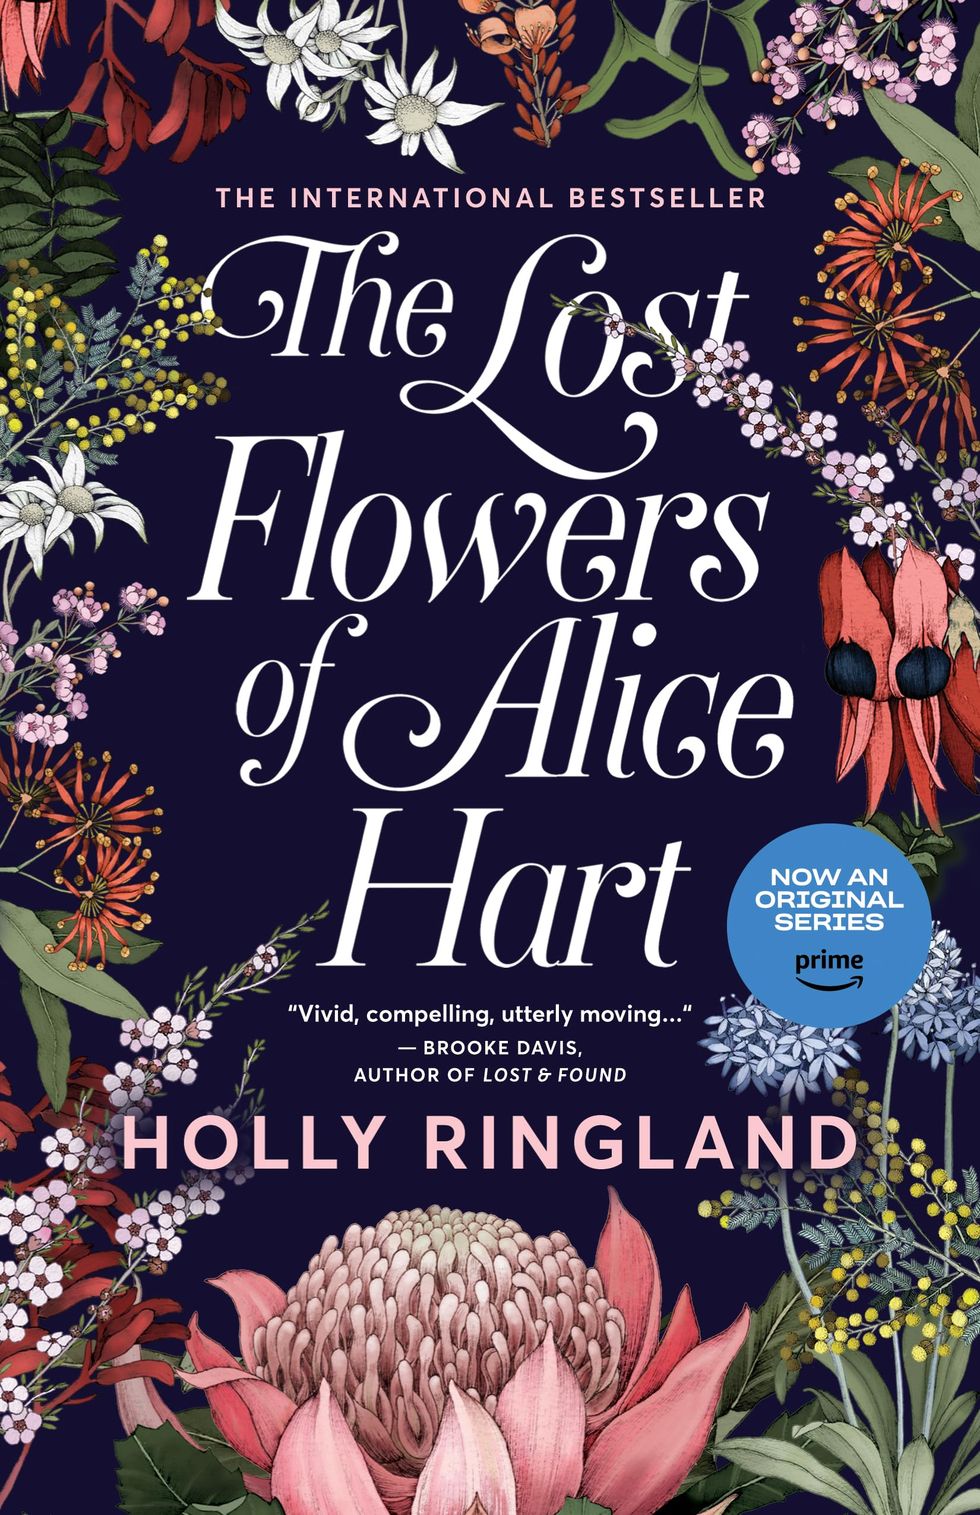 'The Lost Flowers of Alice Hart' by Holly Ringland